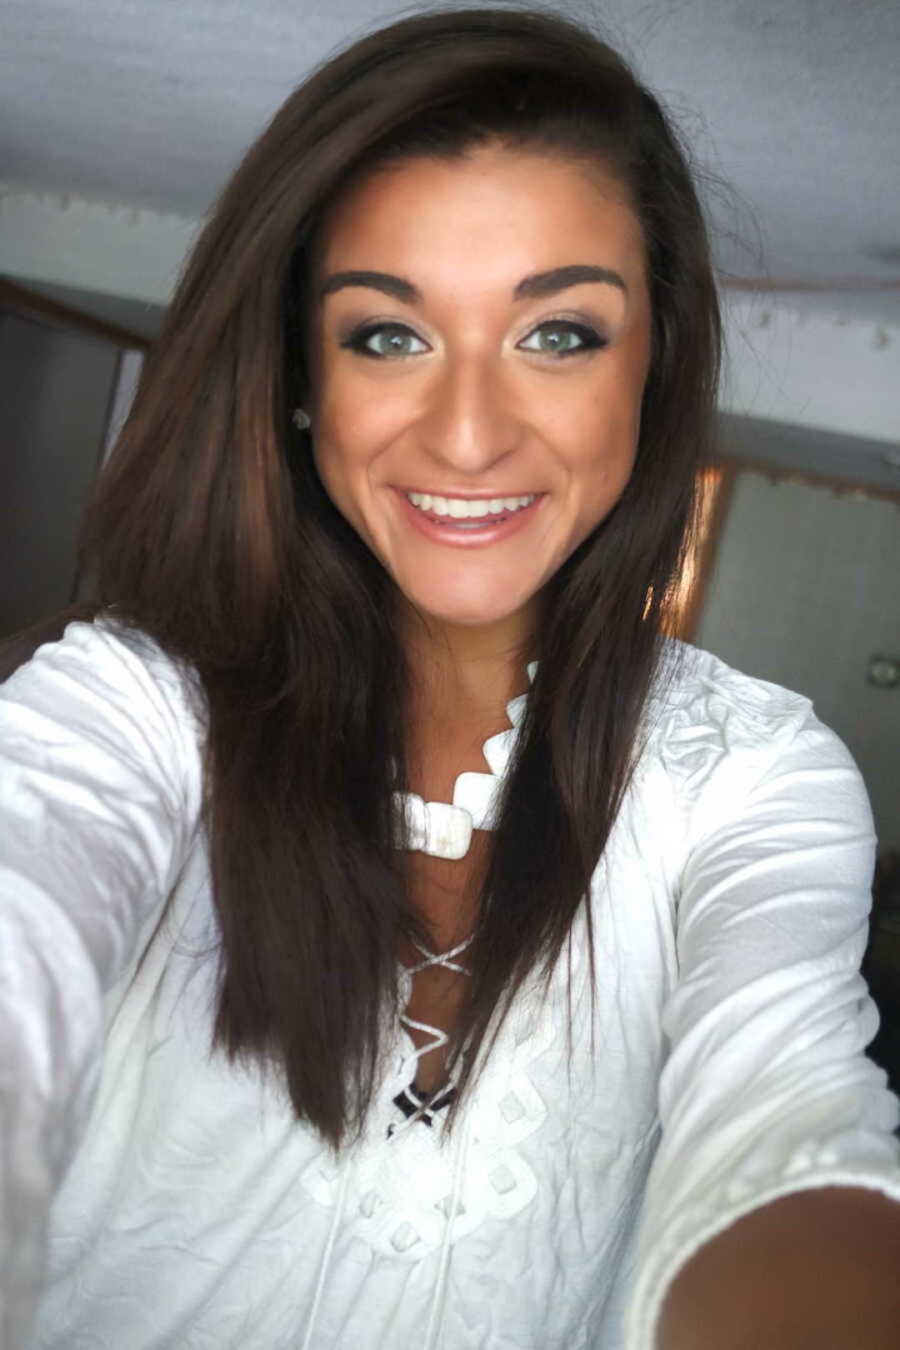 woman in white shirt smiles in selfie